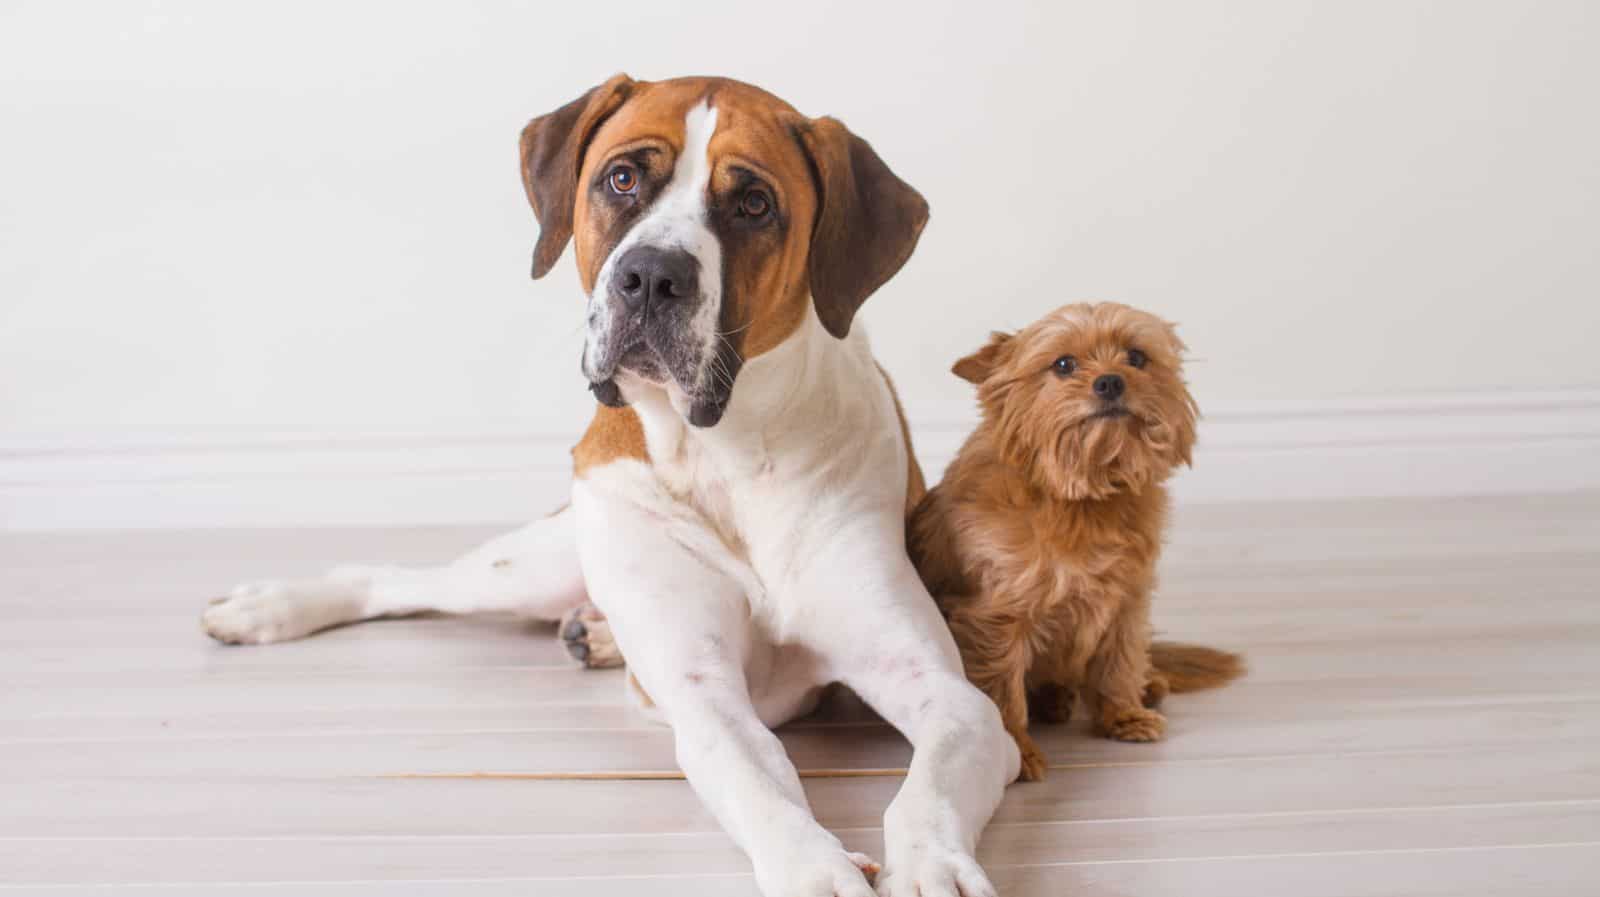 How Much Bigger Can A Male Dog Be Than The Female?